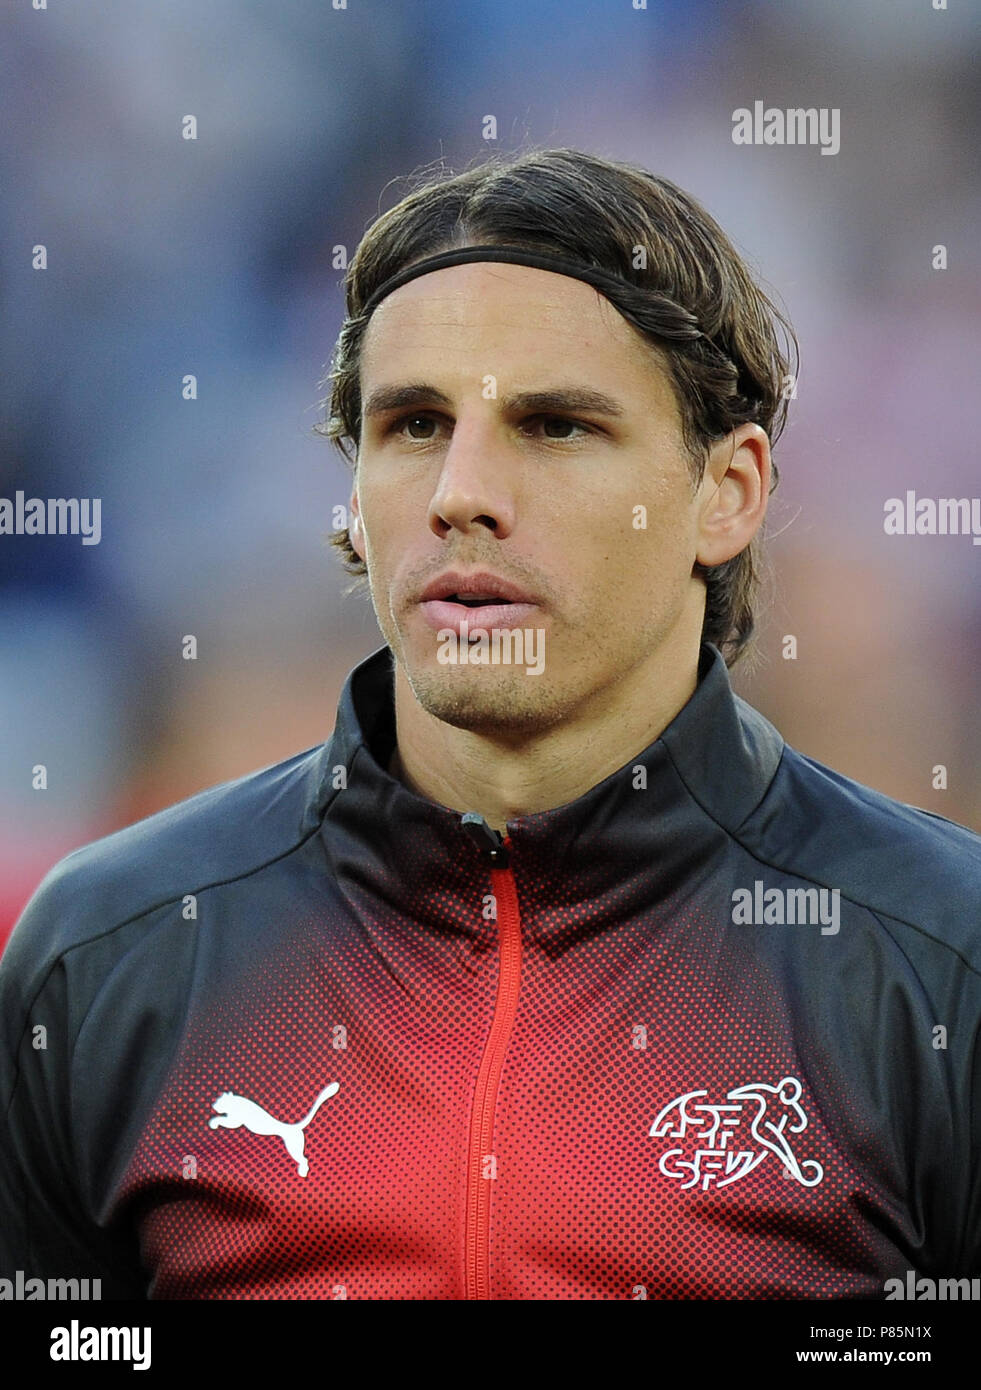 KALININGRAD, RUSSIA - JUNE 22: Yann Sommer of Switzerland  during the 2018 FIFA World Cup Russia group E match between Serbia and Switzerland at Kaliningrad Stadium on June 22, 2018 in Kaliningrad, Russia. (Photo by Norbert Barczyk/PressFocus/MB Media) Stock Photo